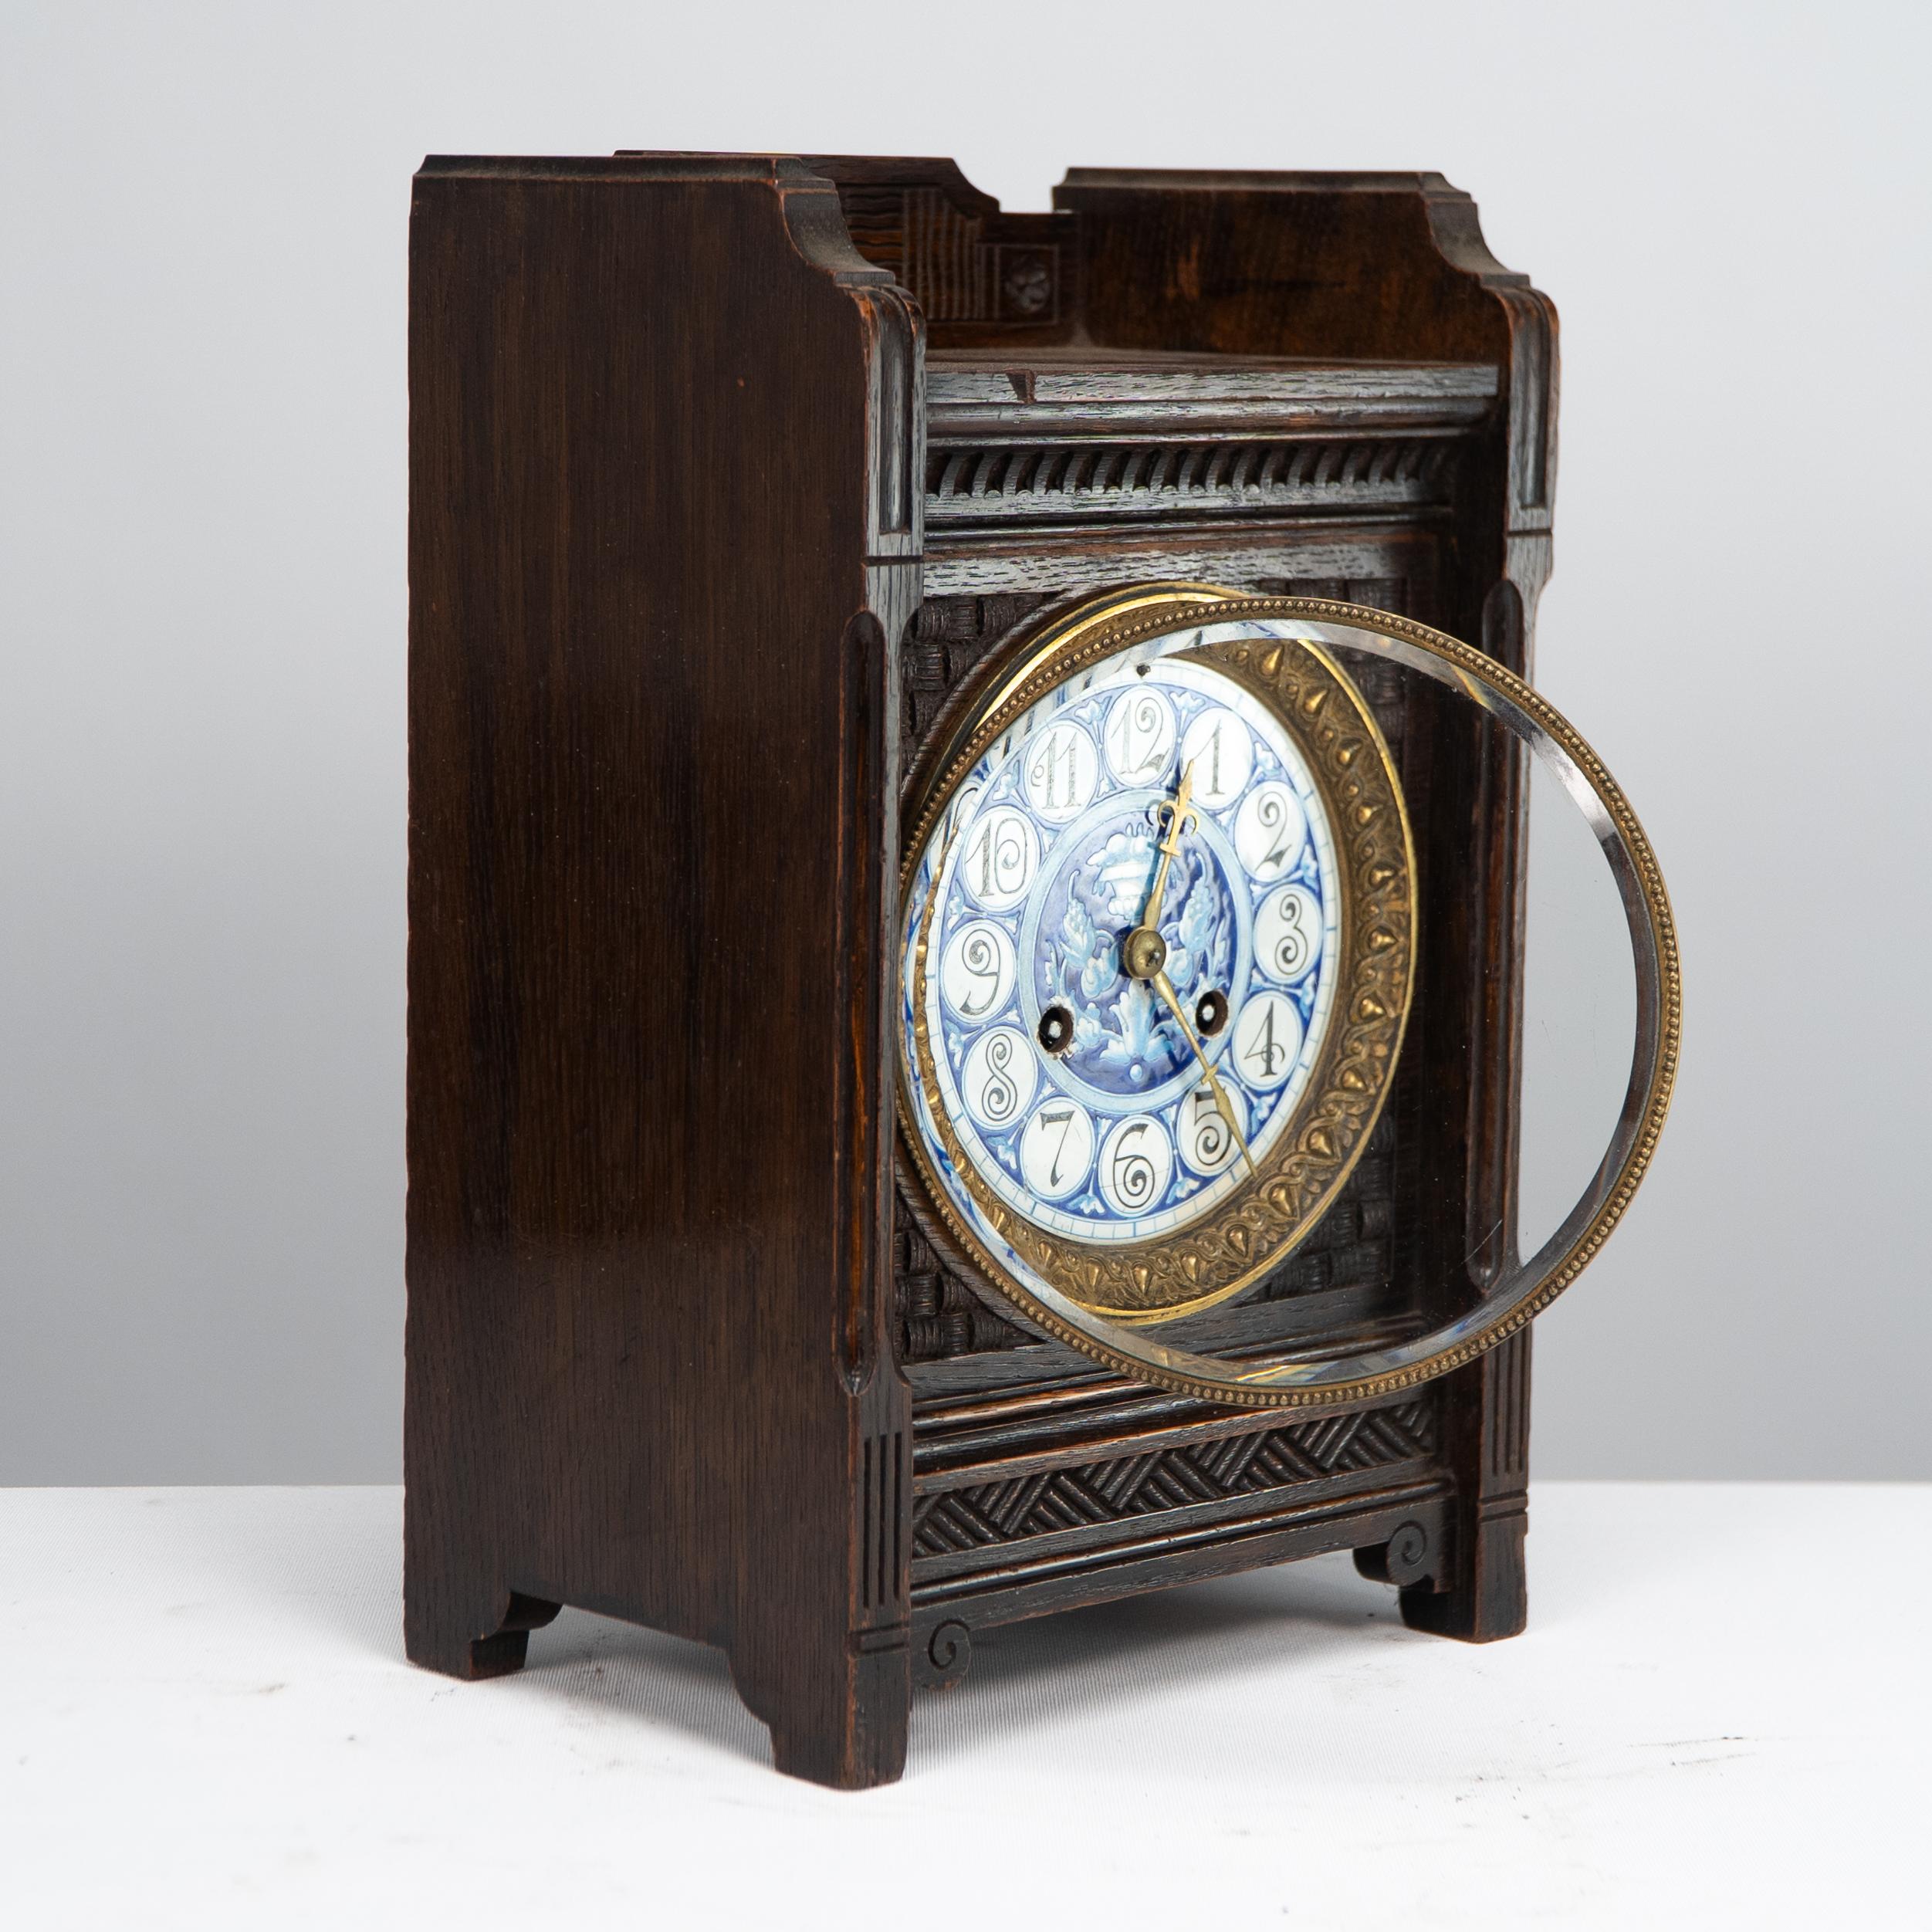 An Anglo-Japanese oak mantel clock with a handpainted blue floral dial surrounded by a floral gilt brass outer ring, the top front and lower section carved with stylized Japanese basket weave decoration, and incised details to the front upright and